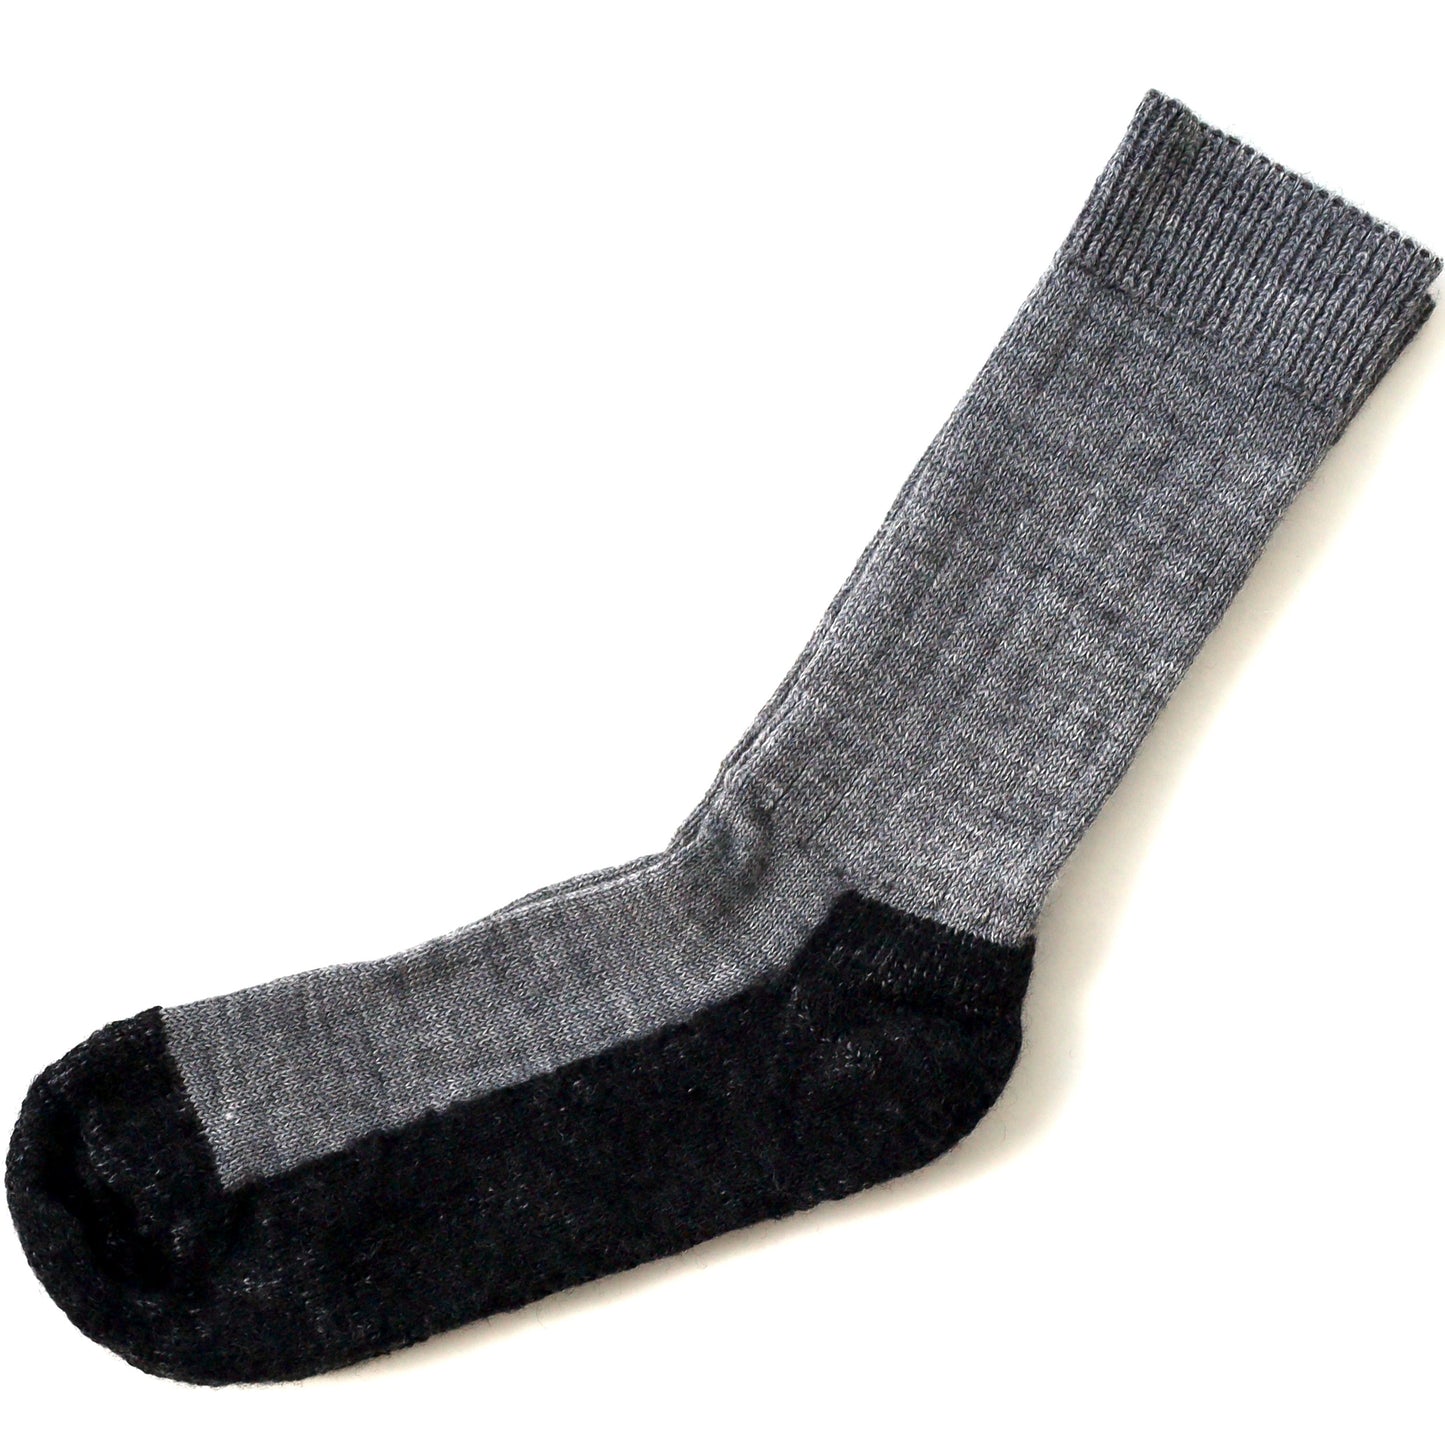 Hirsch Natur Unisex Hiking Sock with Thick Sole, Merino Wool